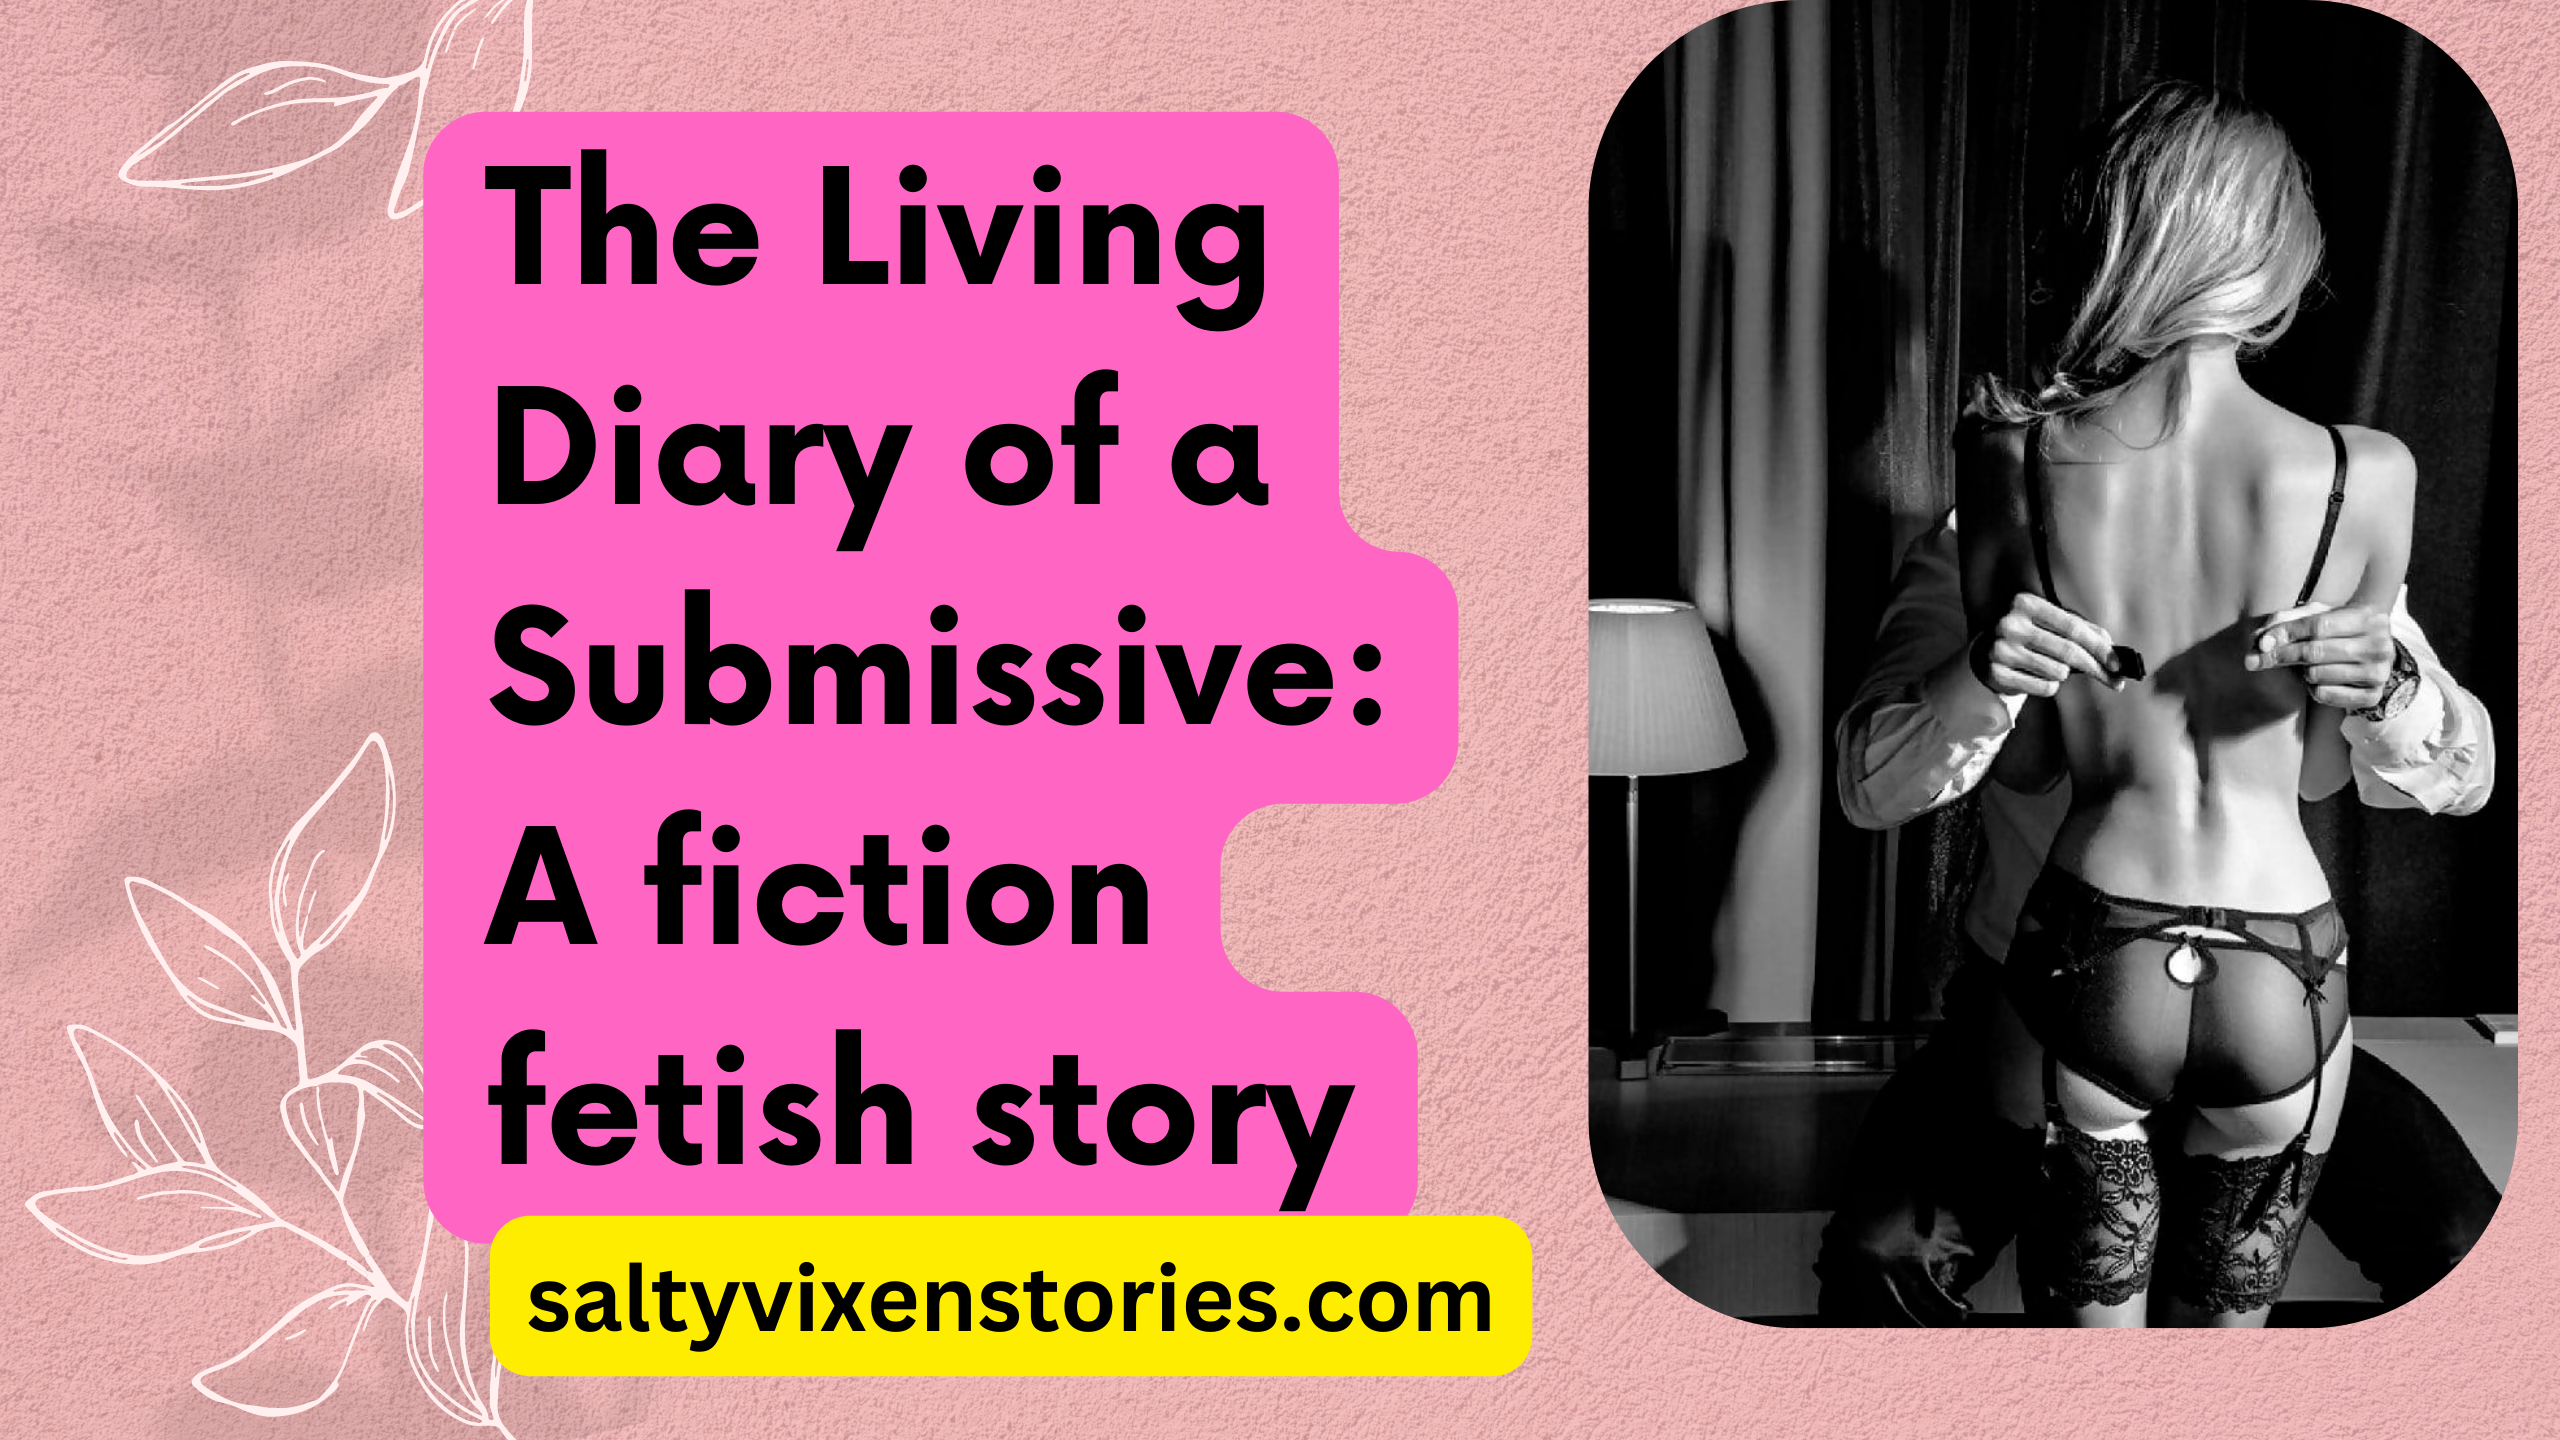 The Living Diary of a Submissive: A fiction fetish story